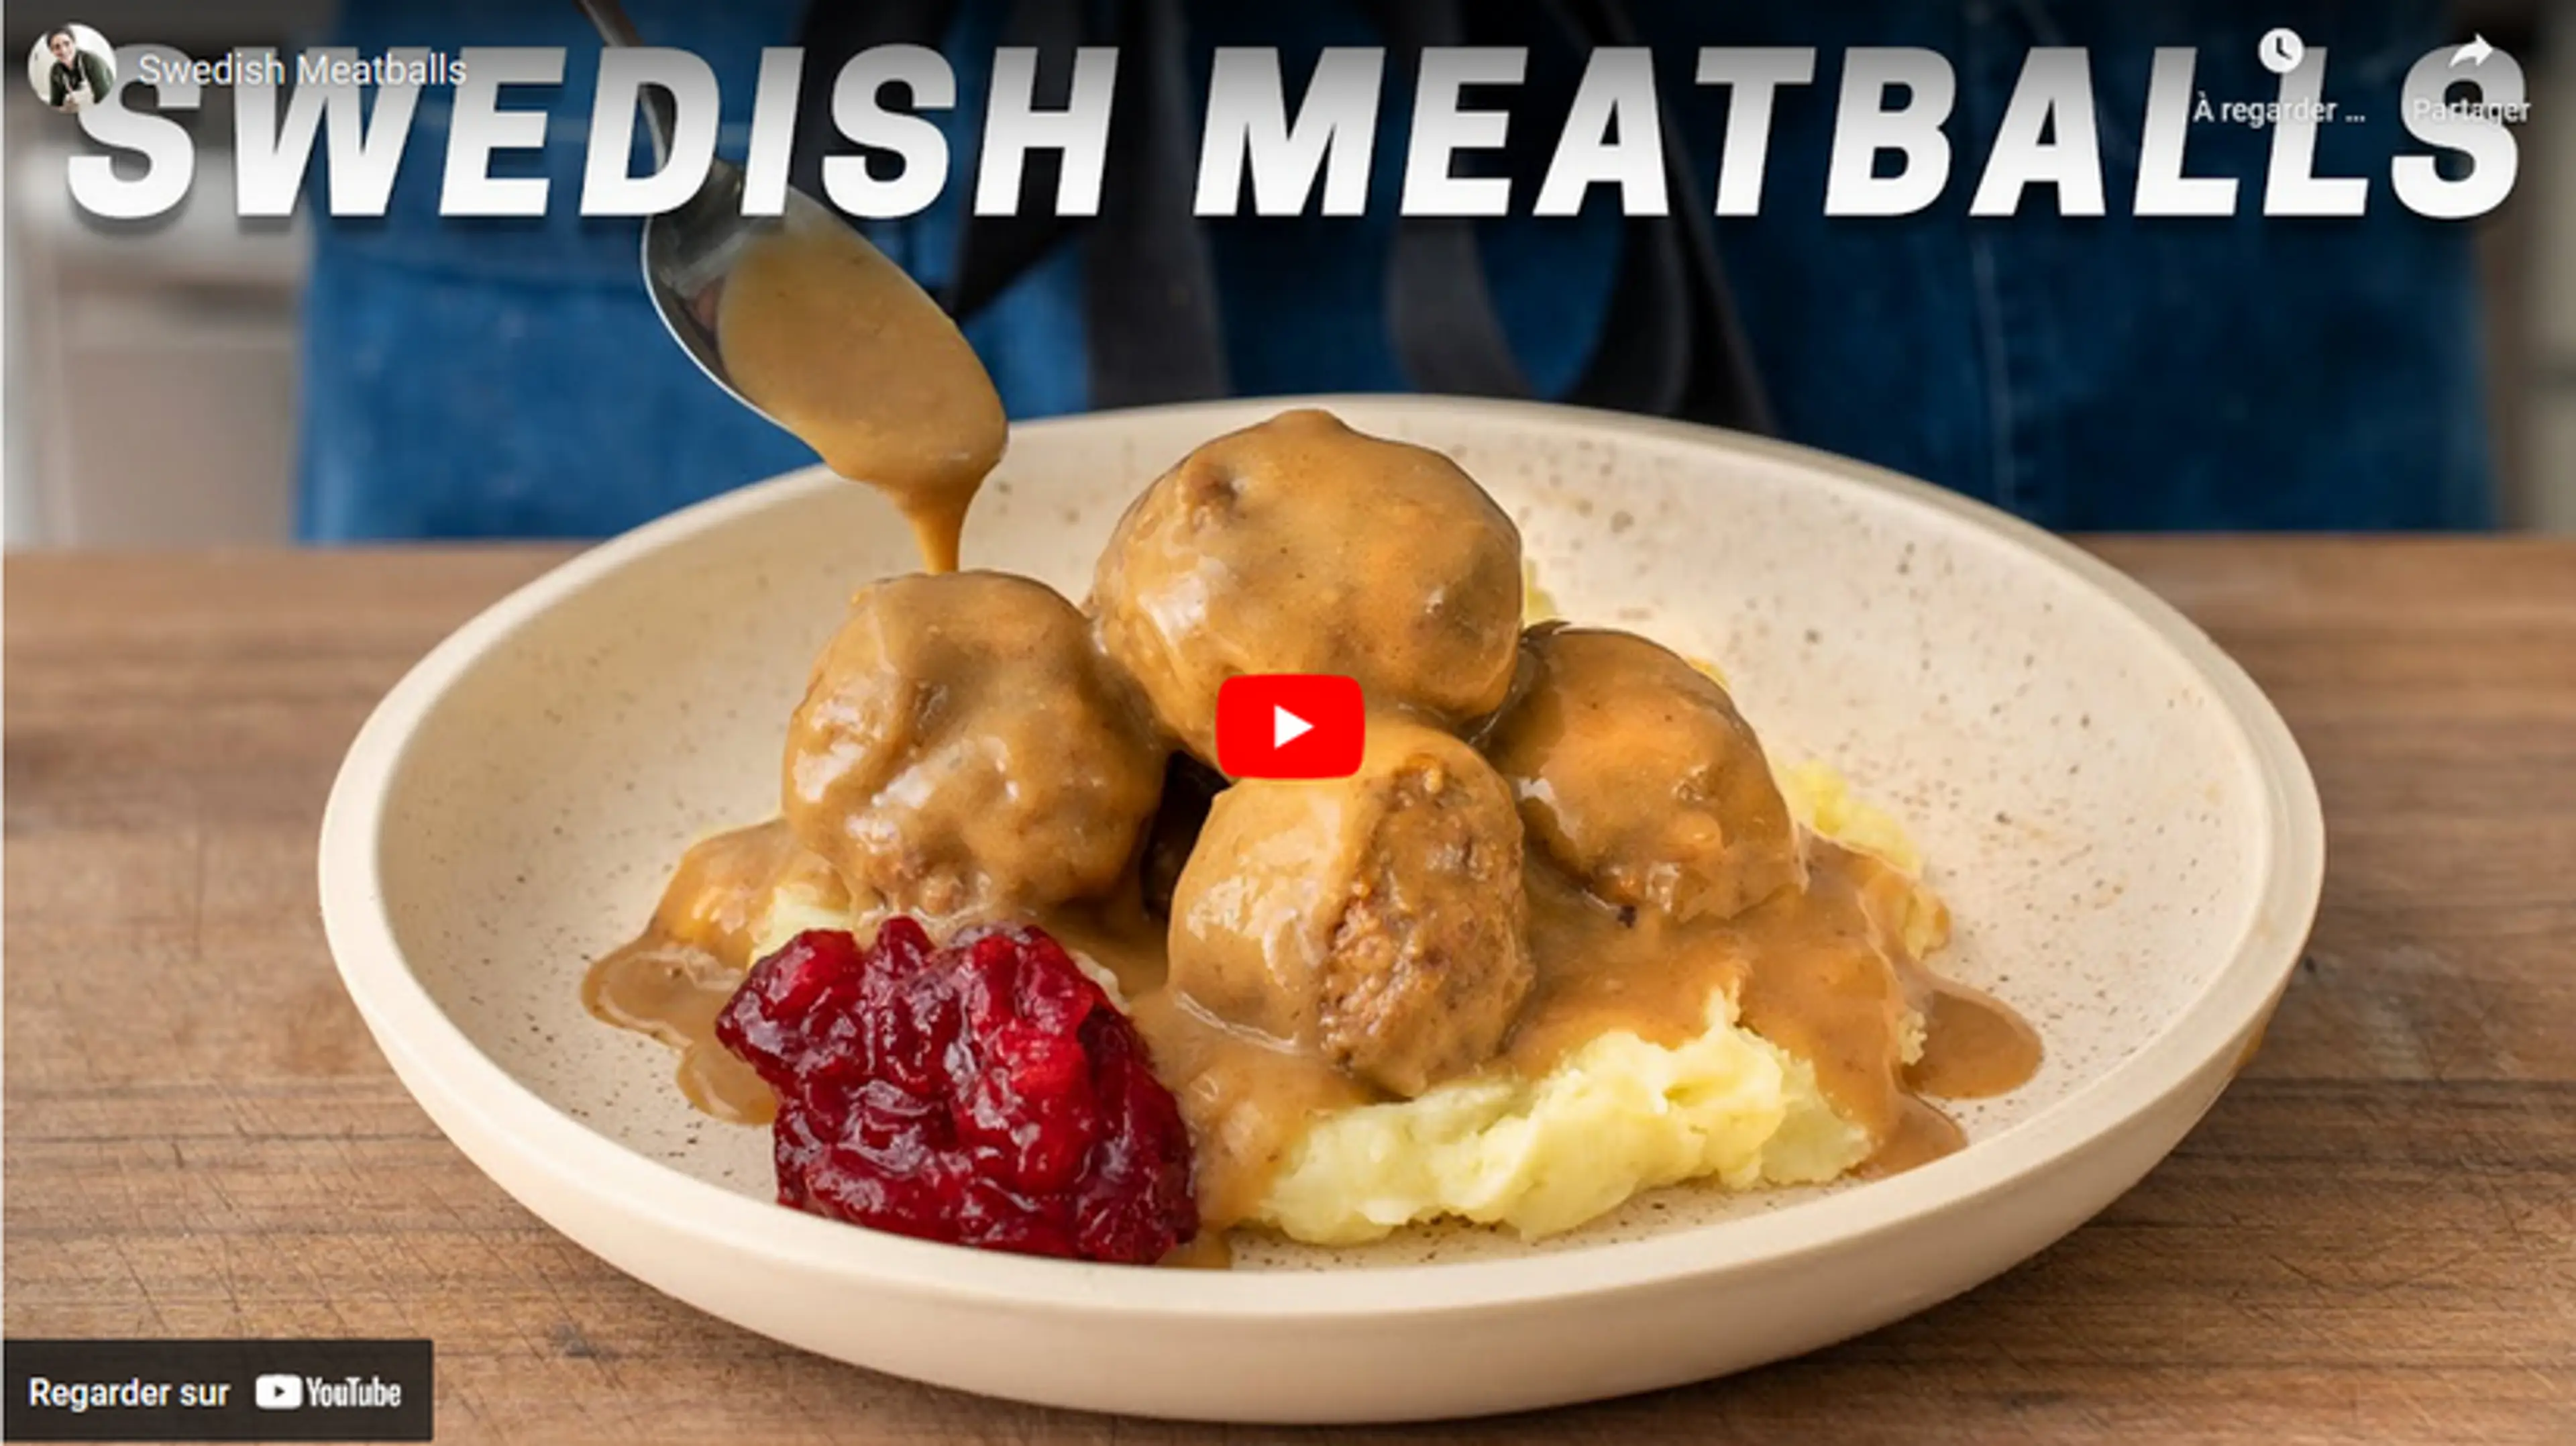 Swedish Meatballs with Cranberry Jelly, Mashed Potatoes and